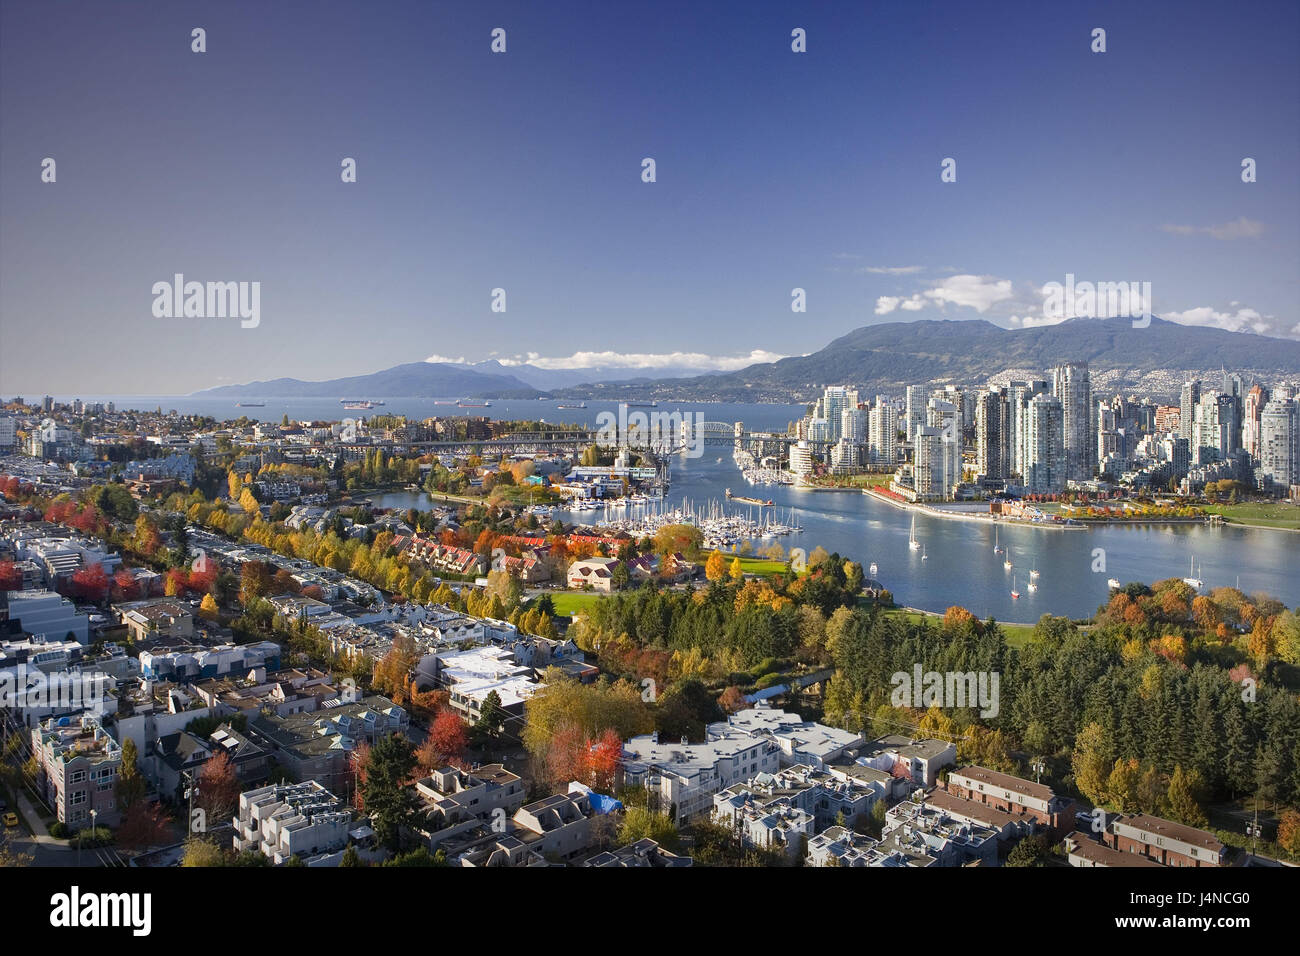 Canada, British Columbia, Vancouver, False Creek, centre of the city, town view, North America, British Colombia, town, port, high rises, buildings, architecture, water, ships, boats, view, Stock Photo